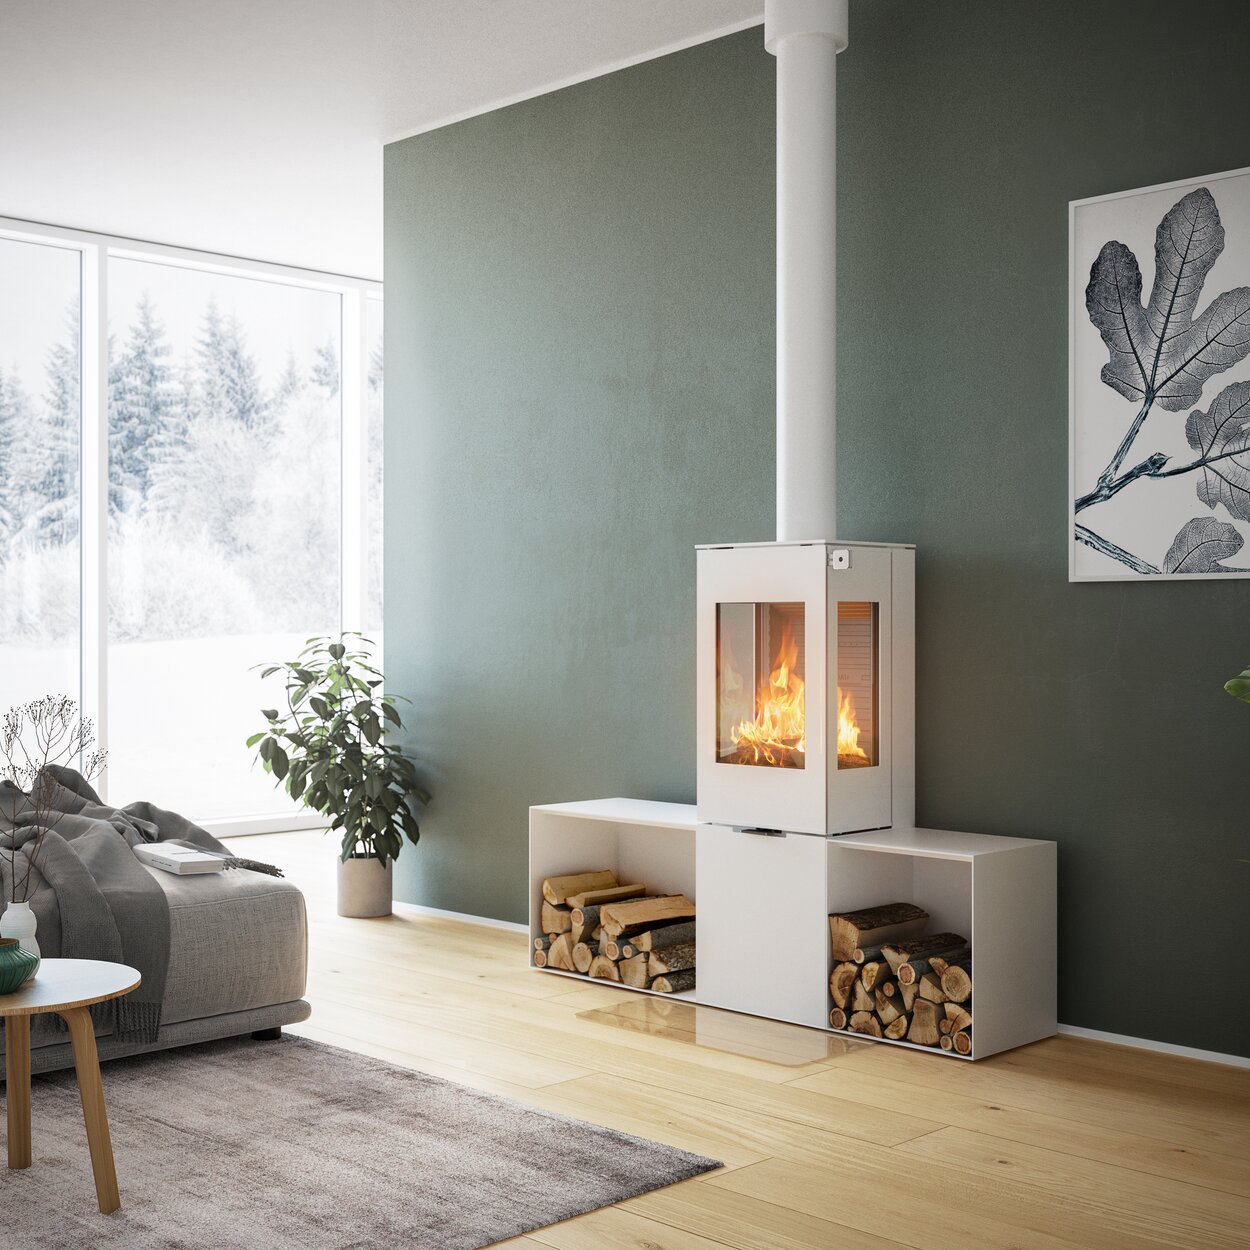 Wood stove NEXO 120 in white with steel door, two side windows and two side benches in front of a green wall in a decorative living area